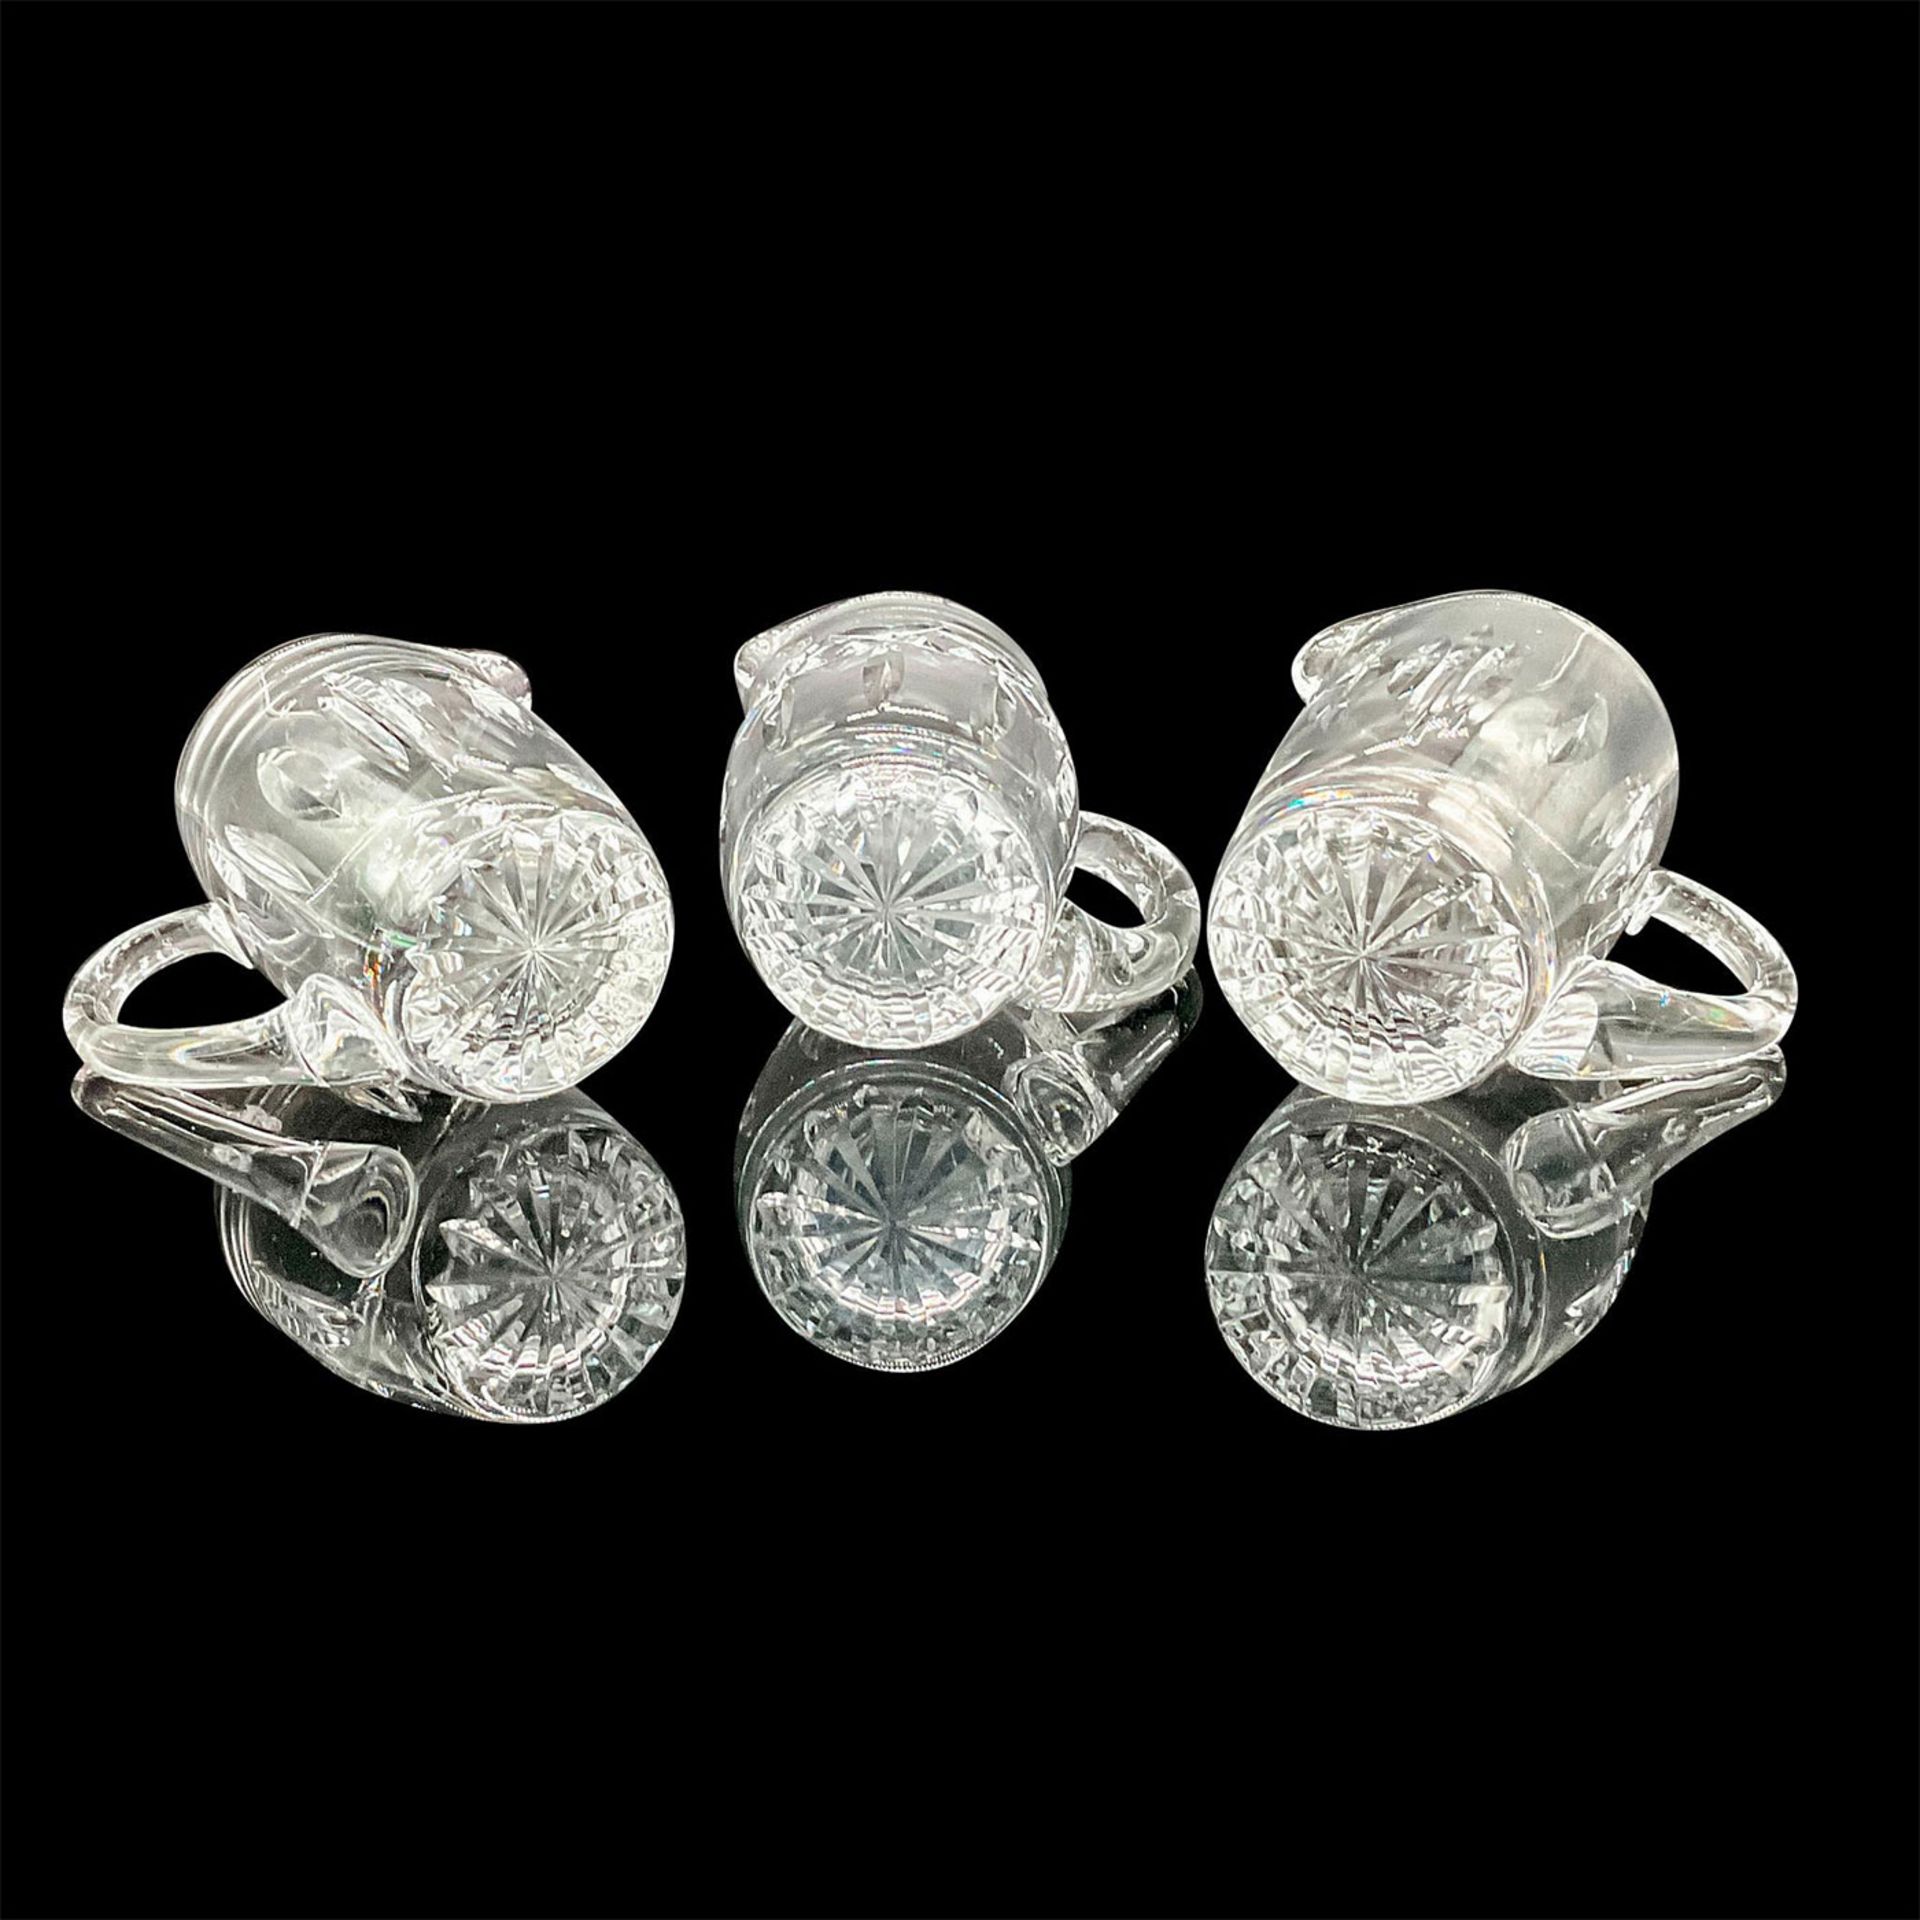 3pc Waterford Crystal Creamers - Image 2 of 3